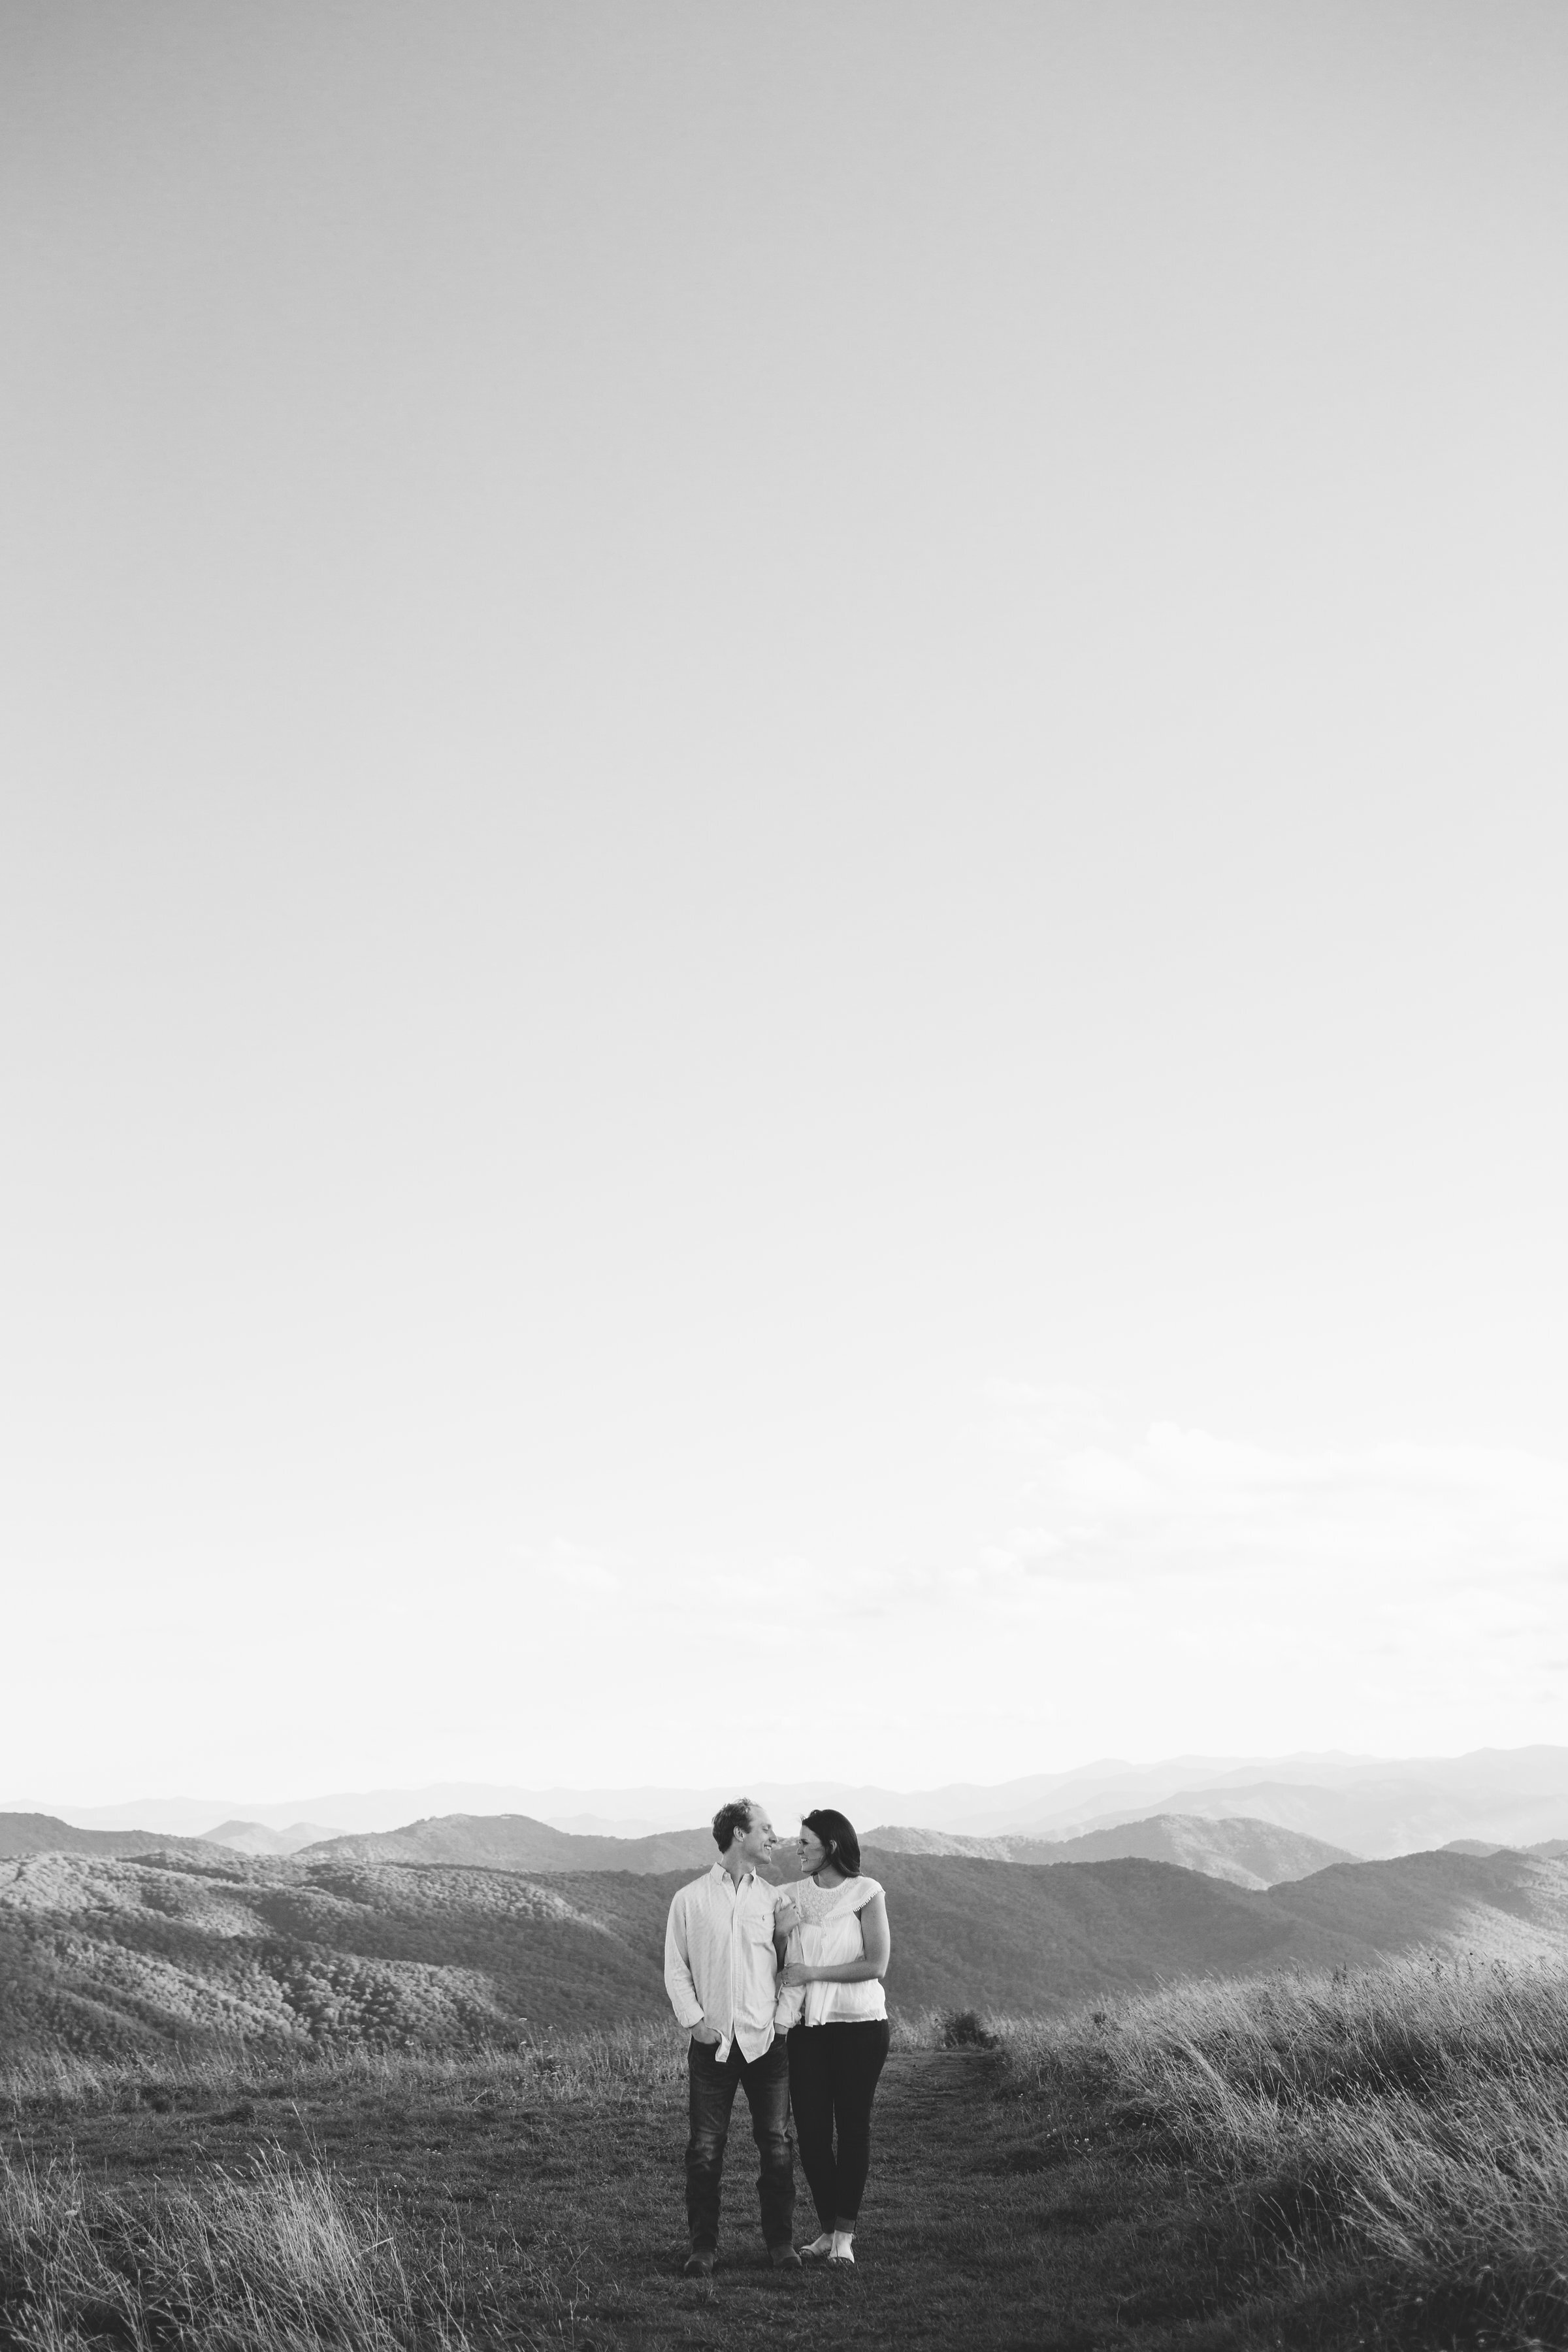 Max Patch Summer Engagement Photos on the Mountain at Sunset black and white image